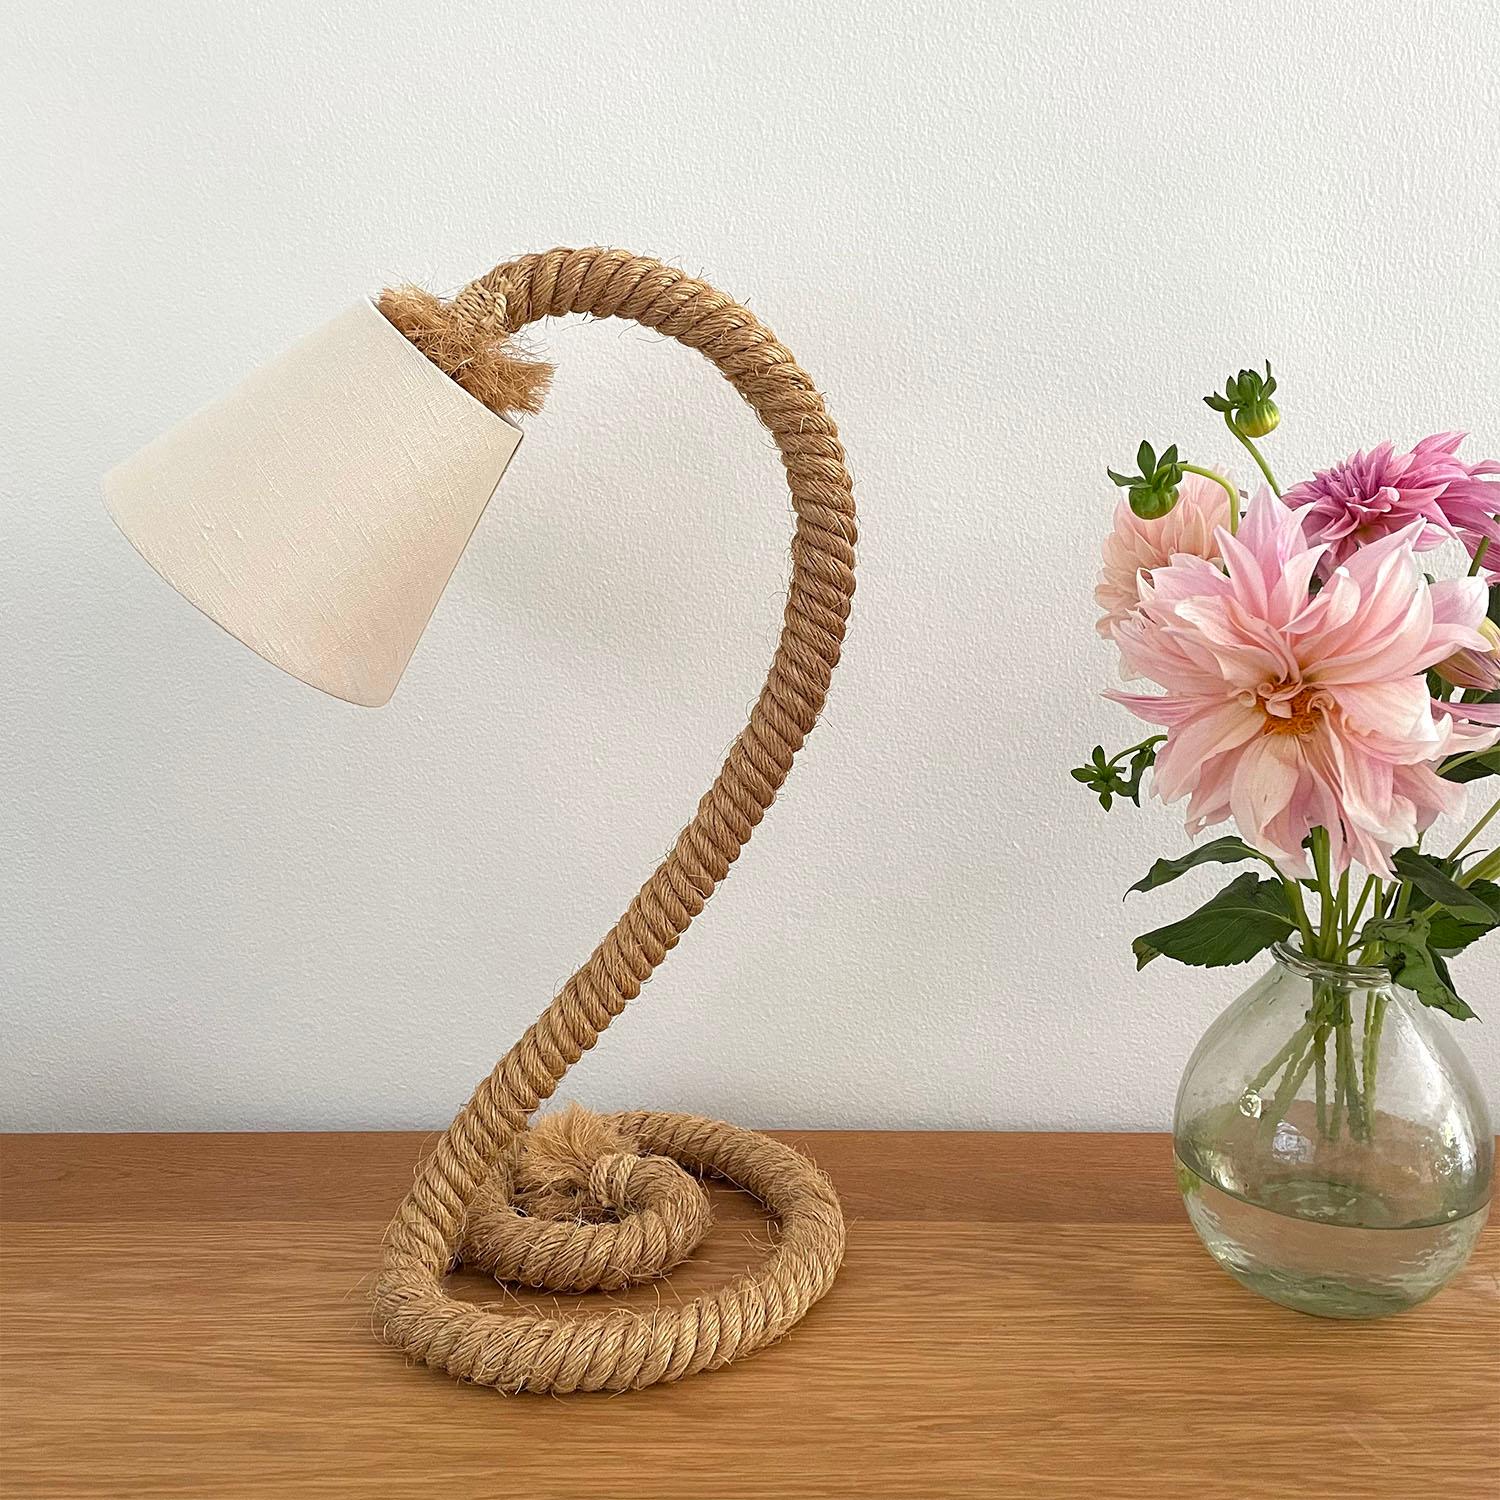 Adrien Audoux and Frida Minet table lamp
France, circa 1950’s
Sculpted twisted rope with unique spiral base 
Beautiful design
New linen shade
Newly rewired
Single socket medium base
Flat fabric cord
Roller switch
Additional Audoux Minet pieces